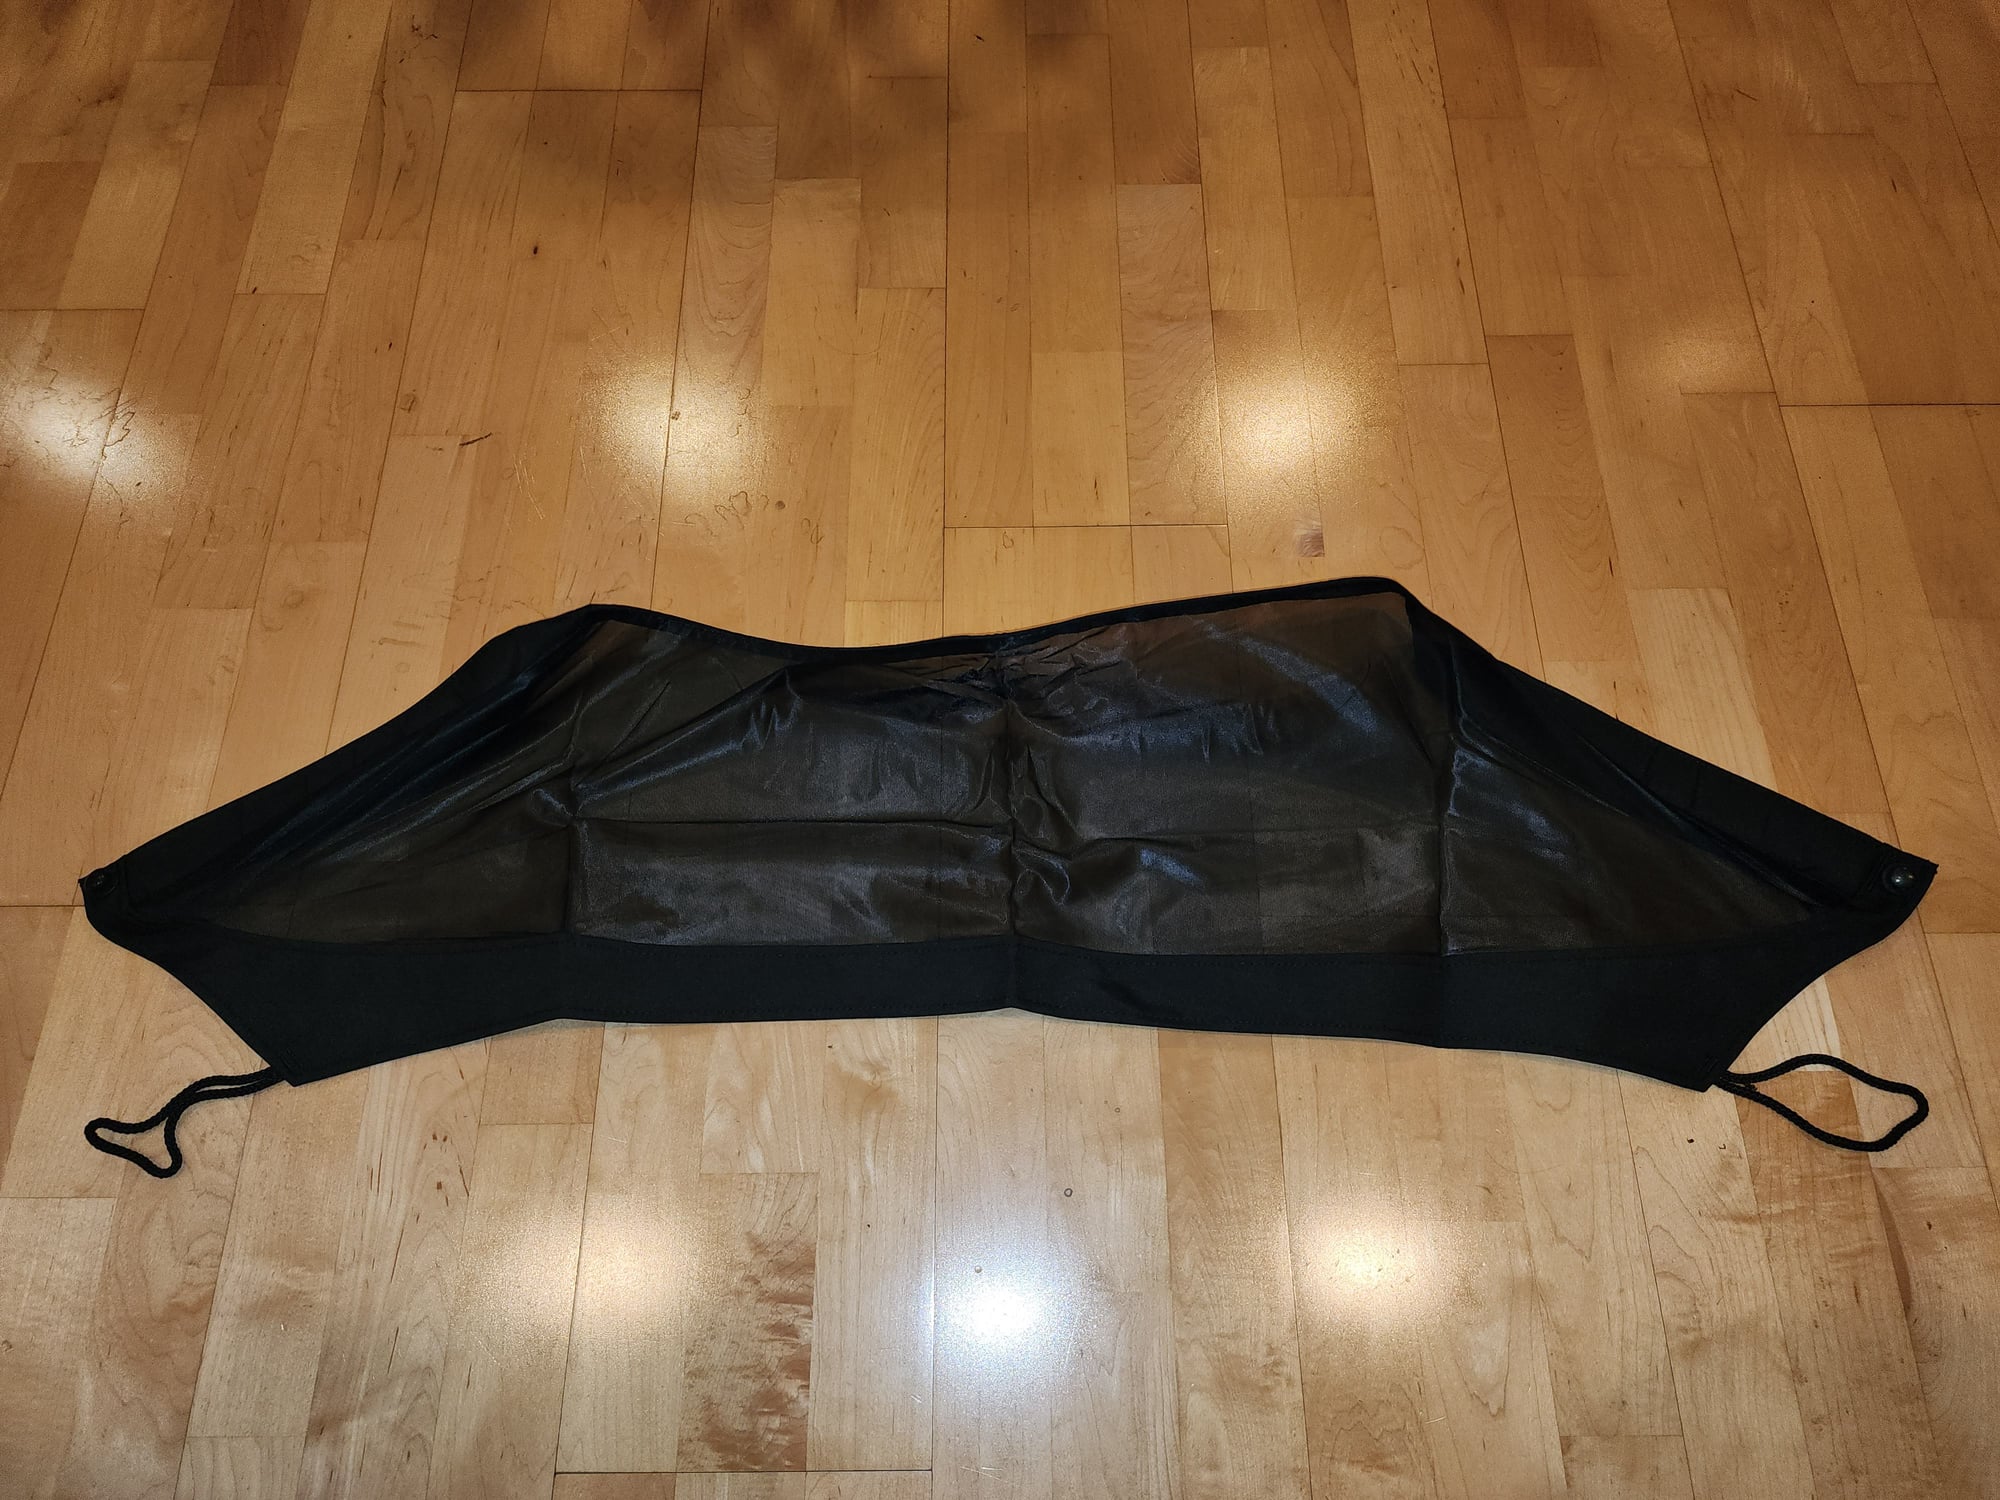 2007 Mercedes-Benz SLK55 AMG - Factory wind deflector (NEW, not sure of part number, $100) - Accessories - $100 - Altadena, CA 91001, United States